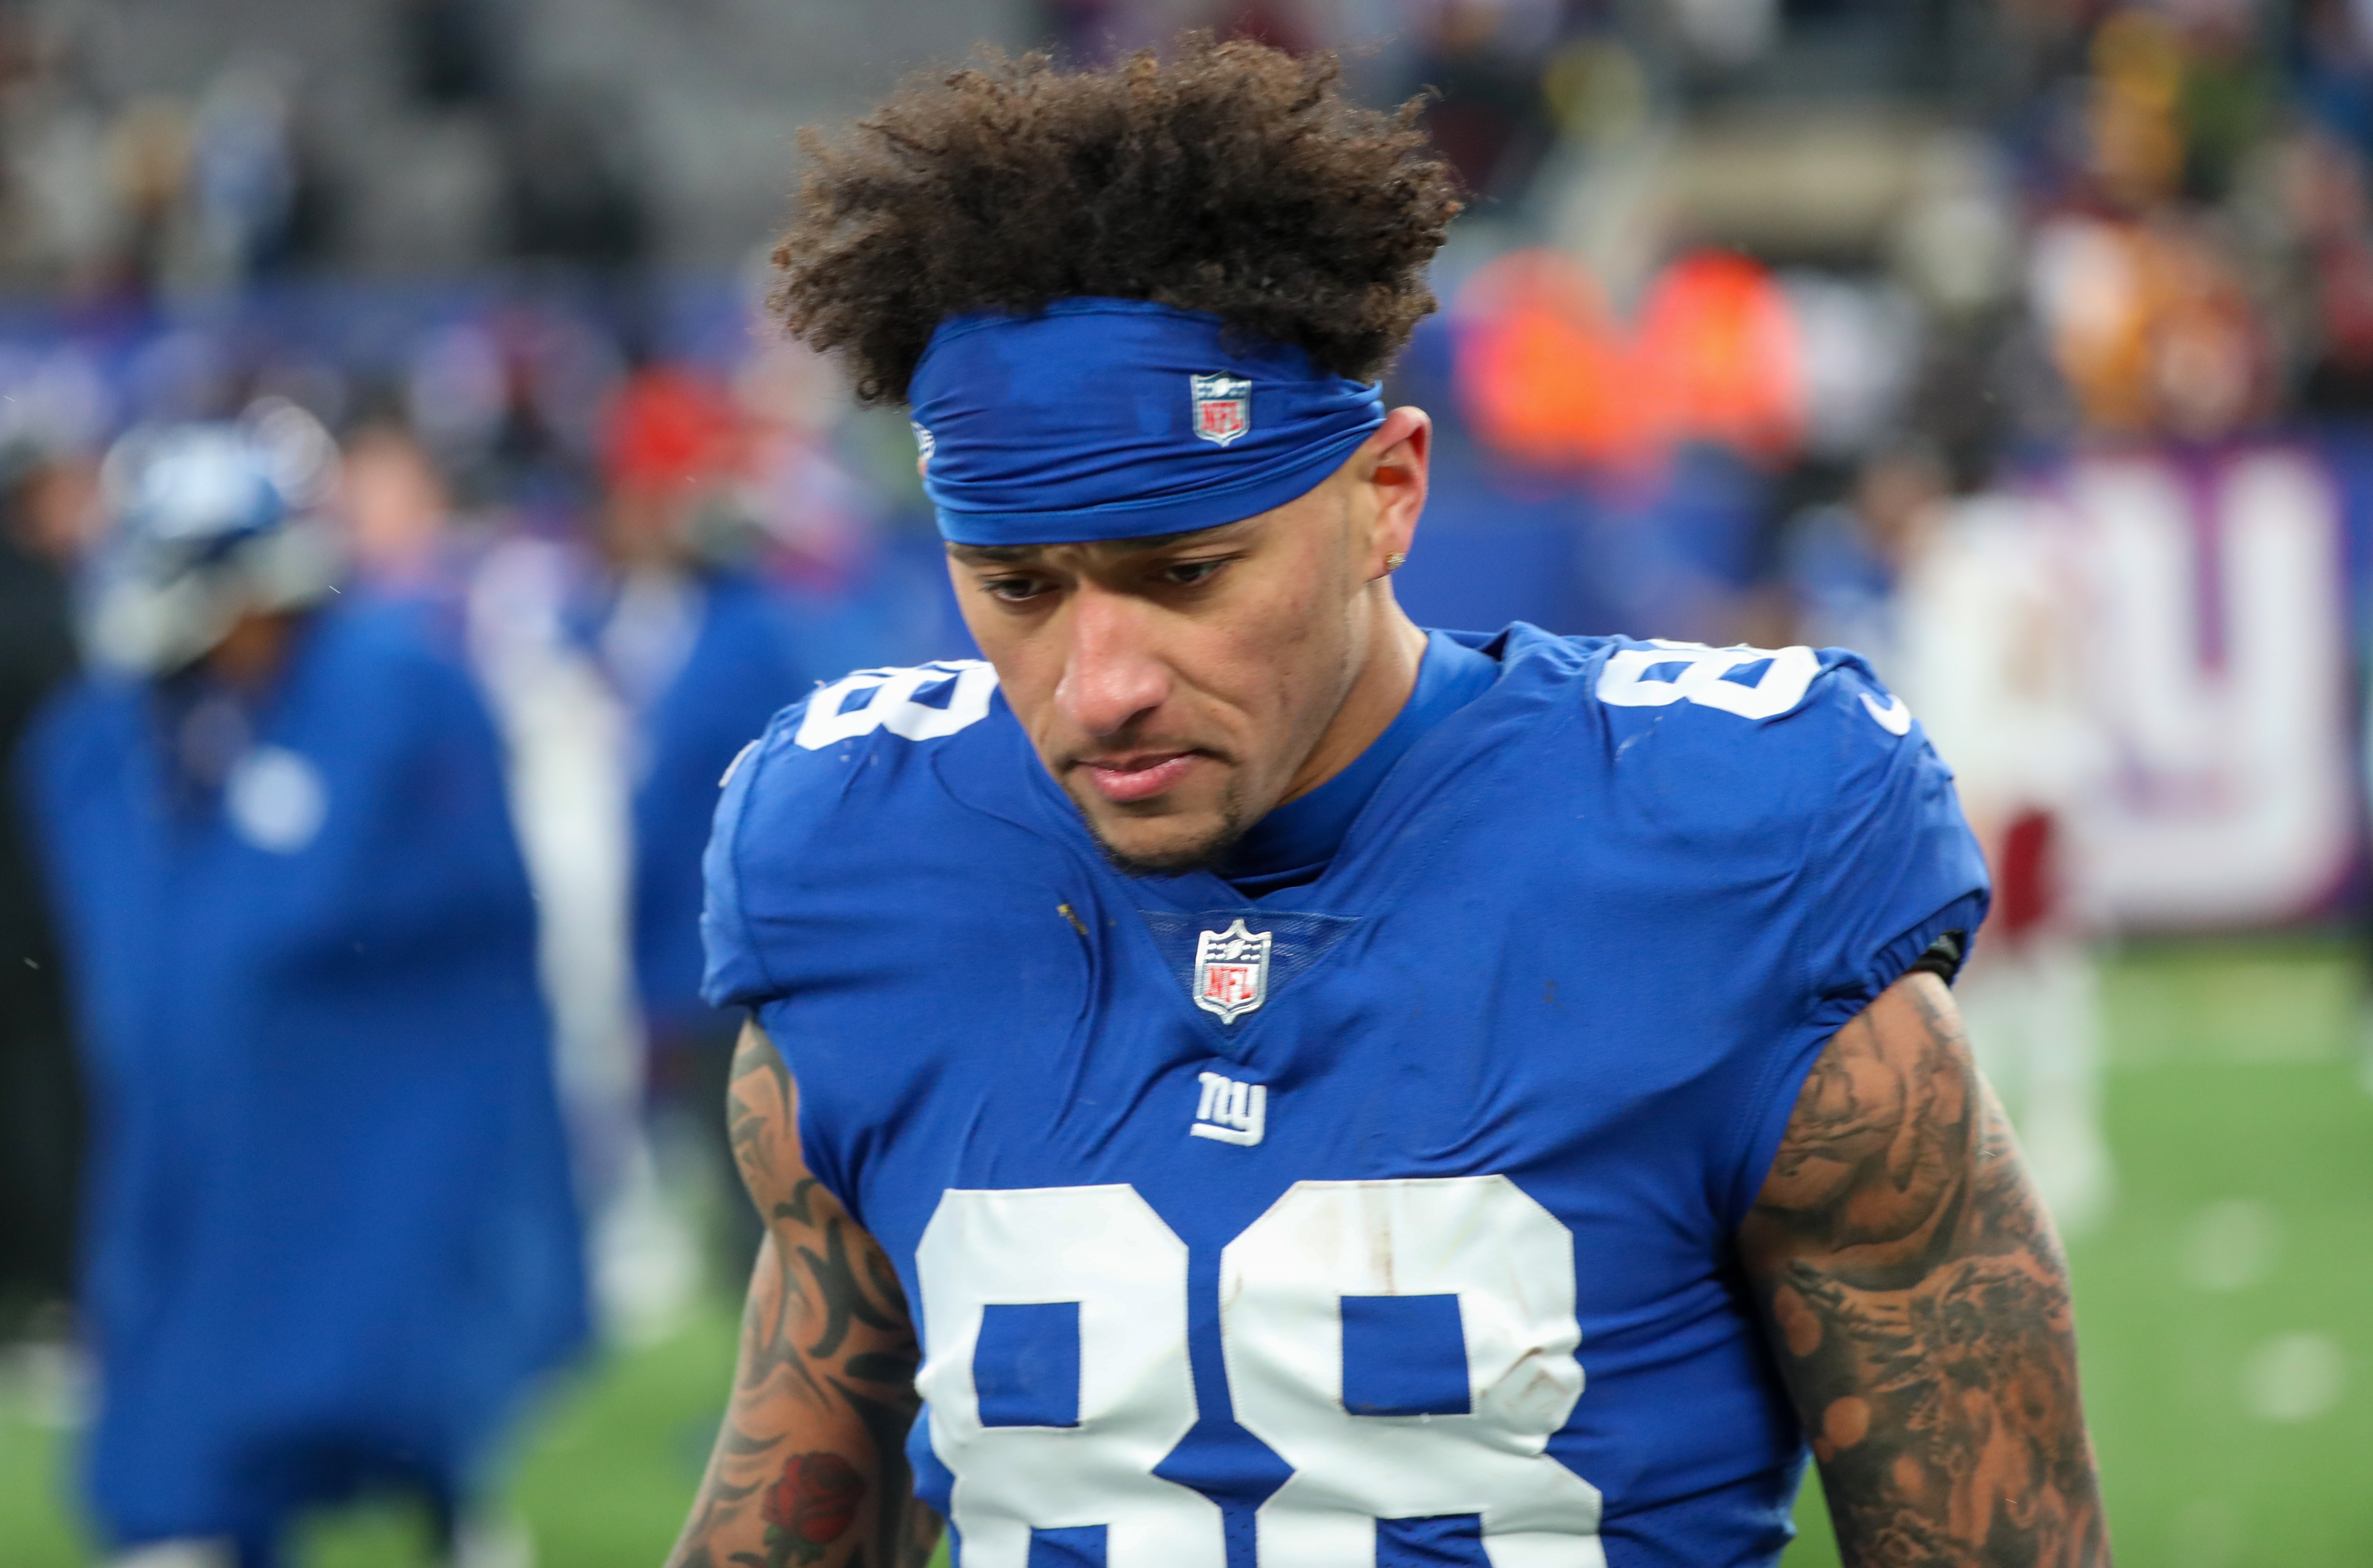 New York Giants tight end Evan Engram (88) walks off after the Giants lost to the Washington Football Team, 22-7, on Sunday, Jan. 9, 2022 in East Rutherford, N.J.